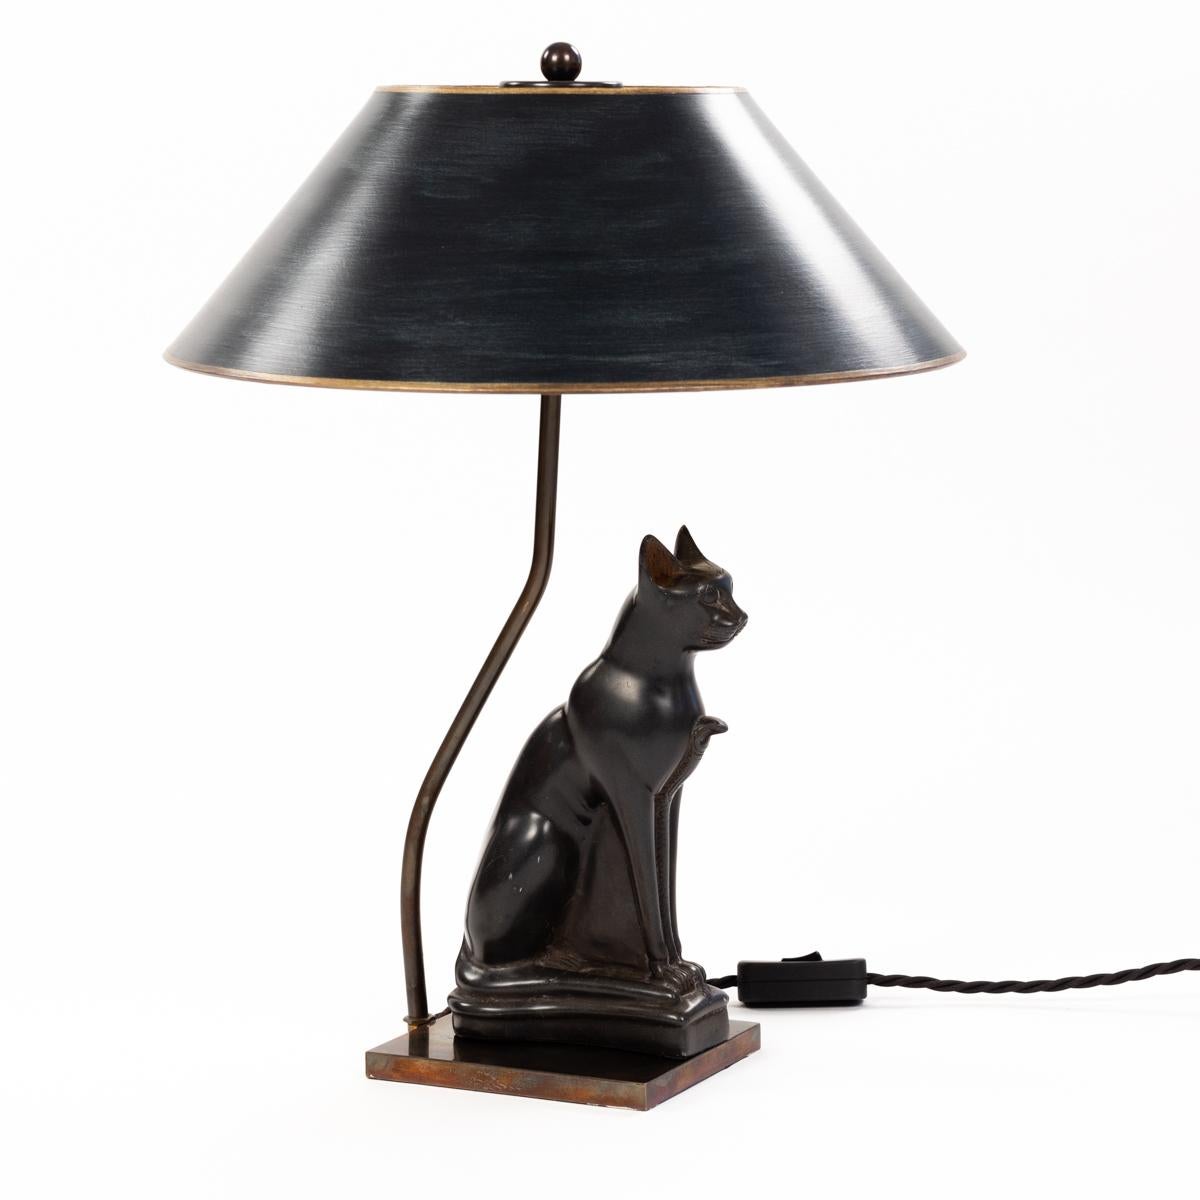 Figural table lamp Sitting stone cat god France 1940-ies.

The object is from the Art Deco period and very finely worked in stone.
The animal sits majestically and straight and radiates a certain calm.
The lamp construction of burnished brass was